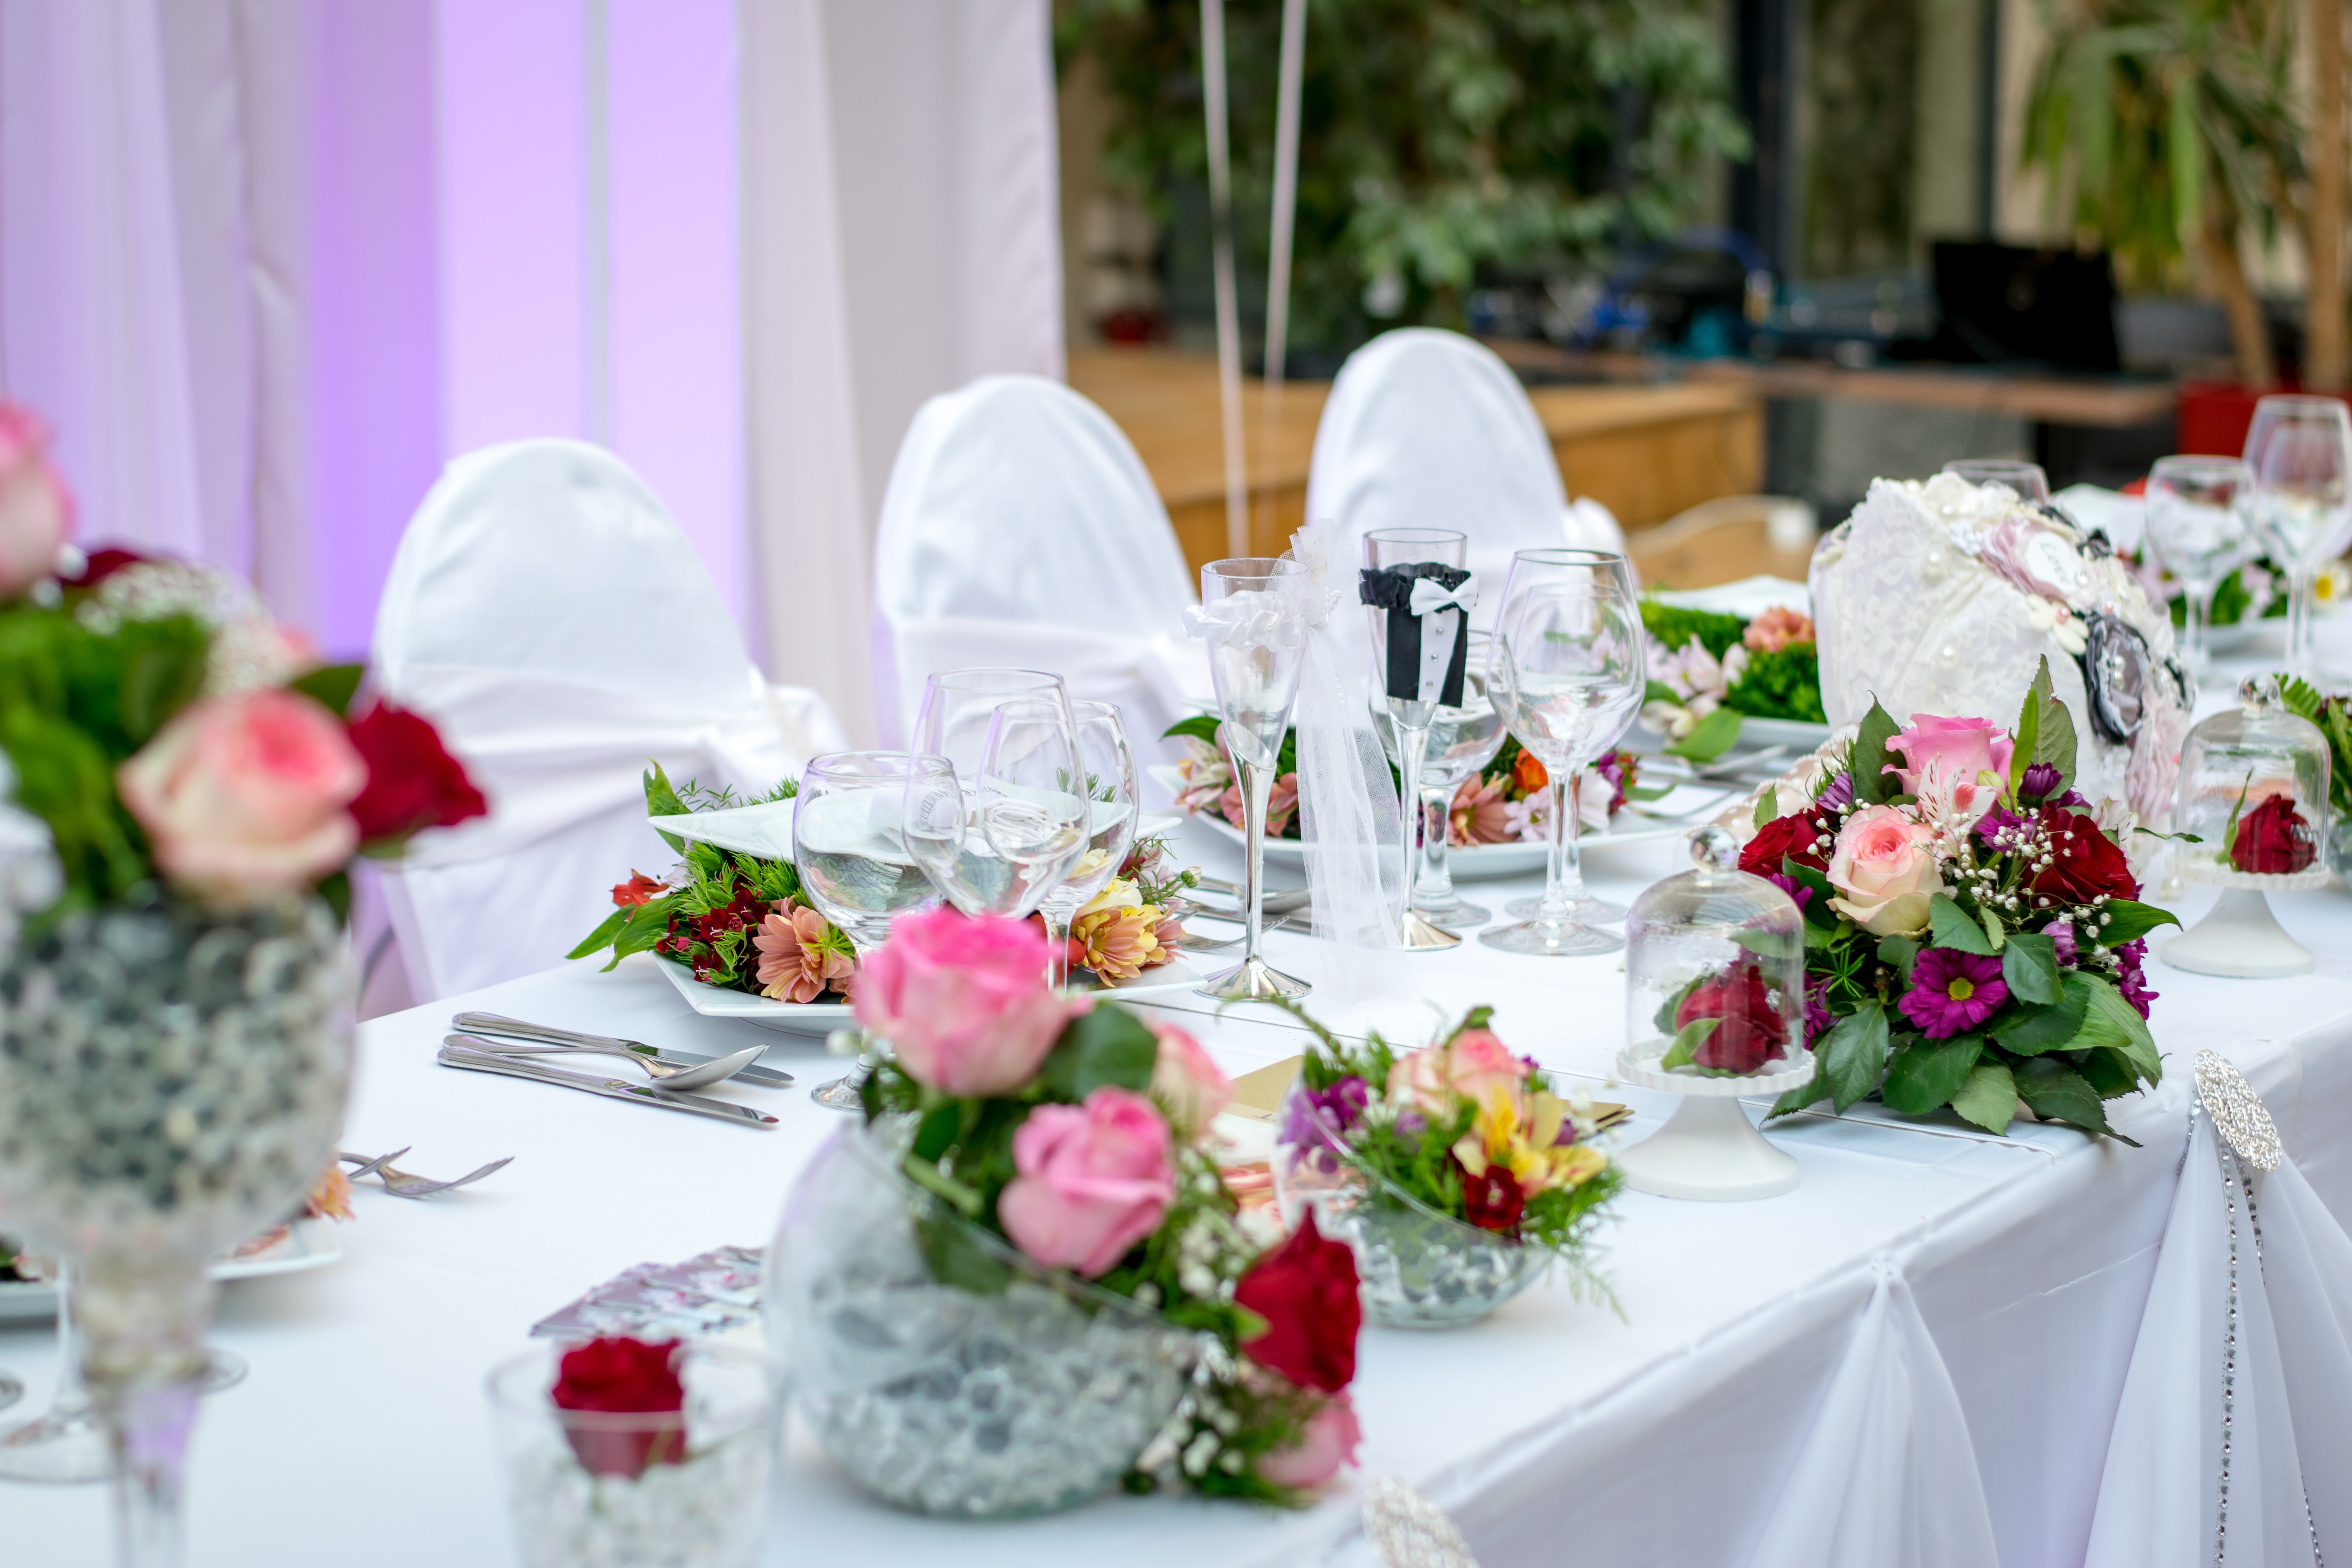 Reception Meal Styles to Consider